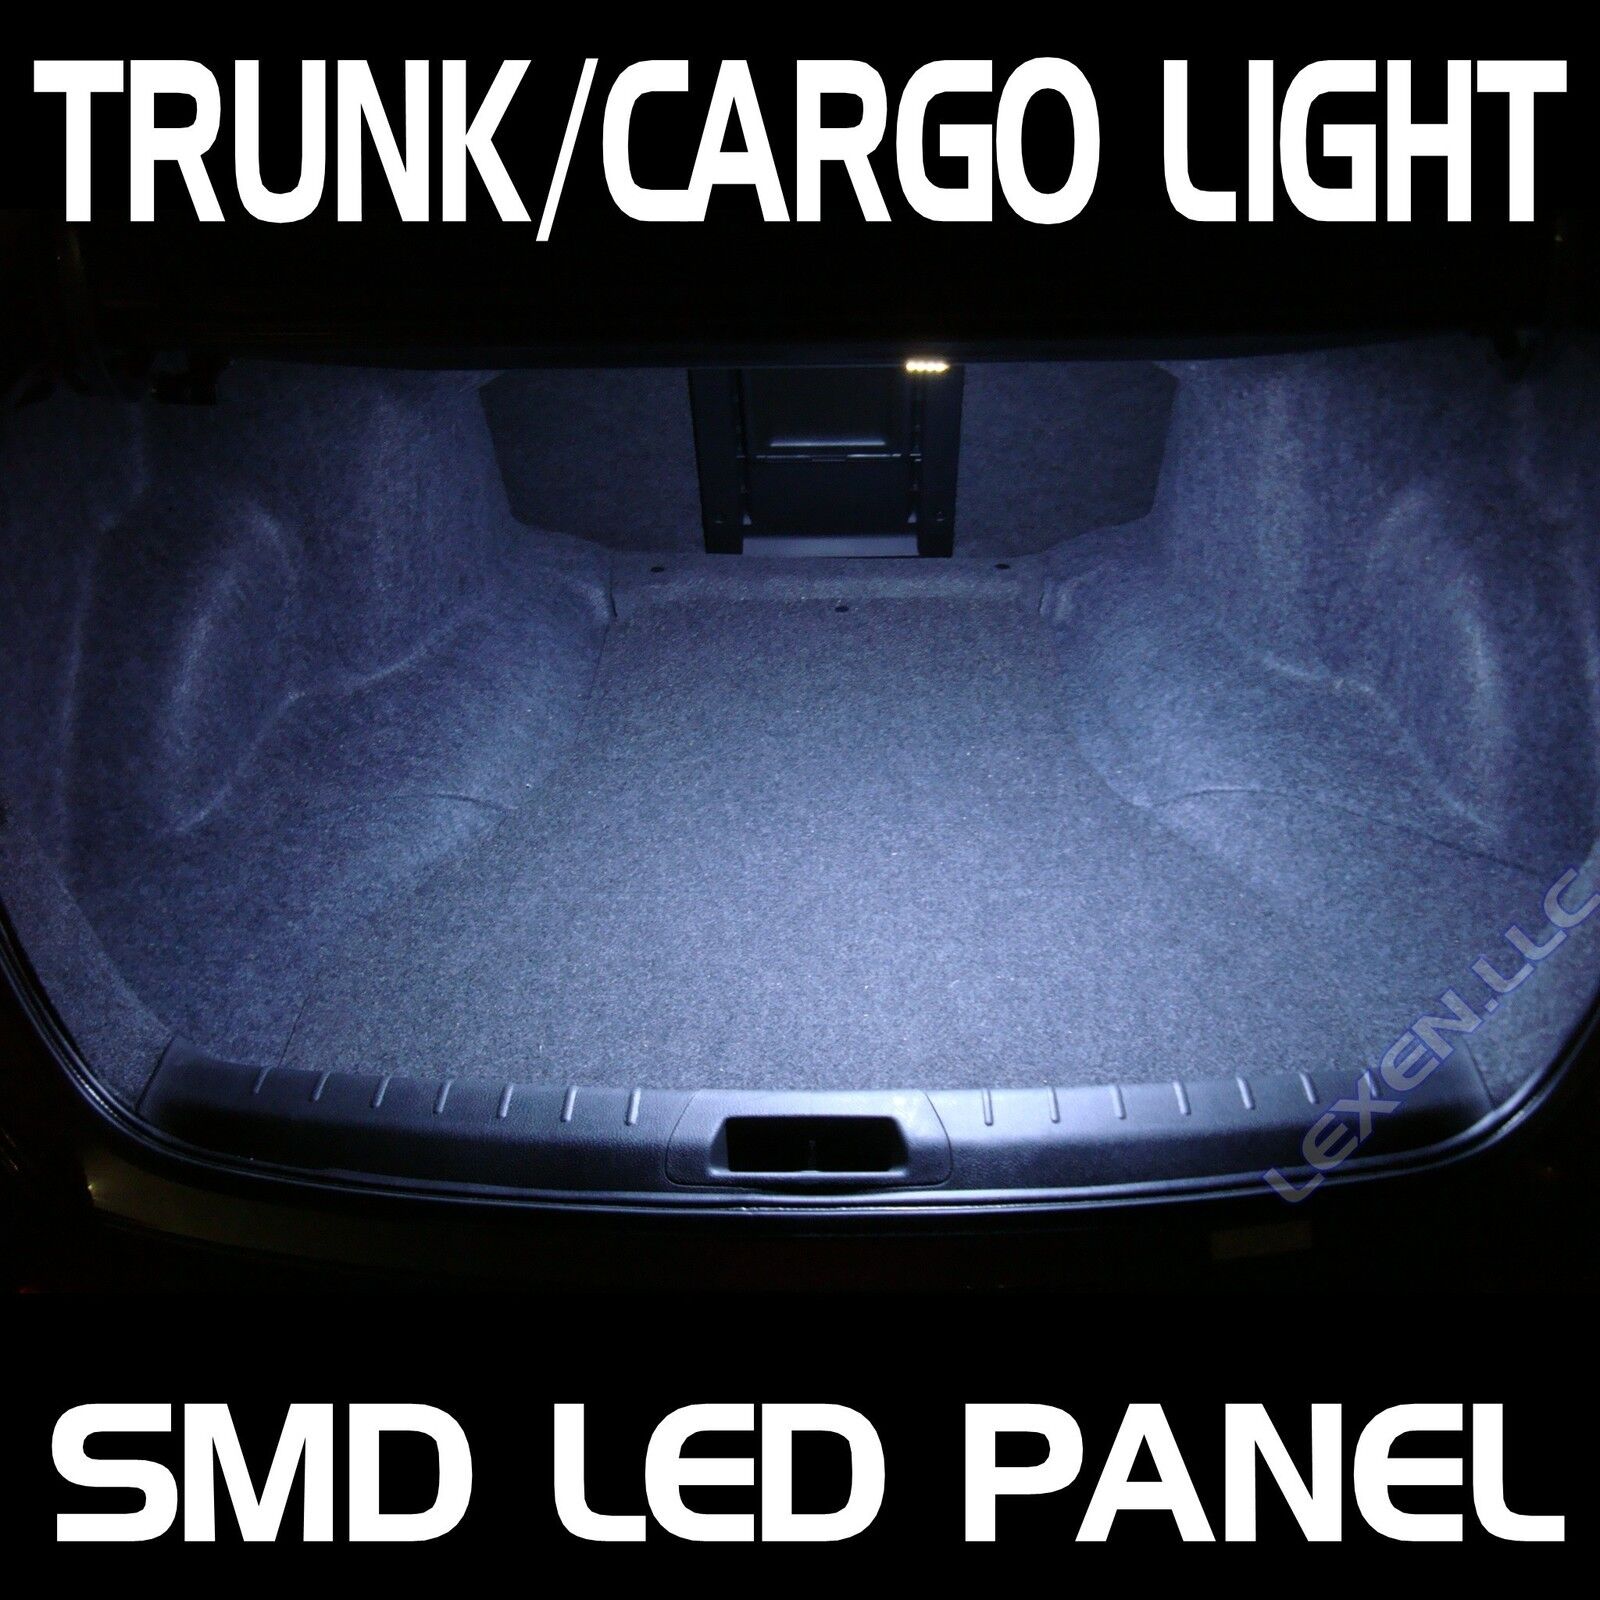 LED W2-1 WHITE 1X TRUNK CARGO LIGHT BULB 12 SMD PANEL XENON HID INTERIOR LAMP a